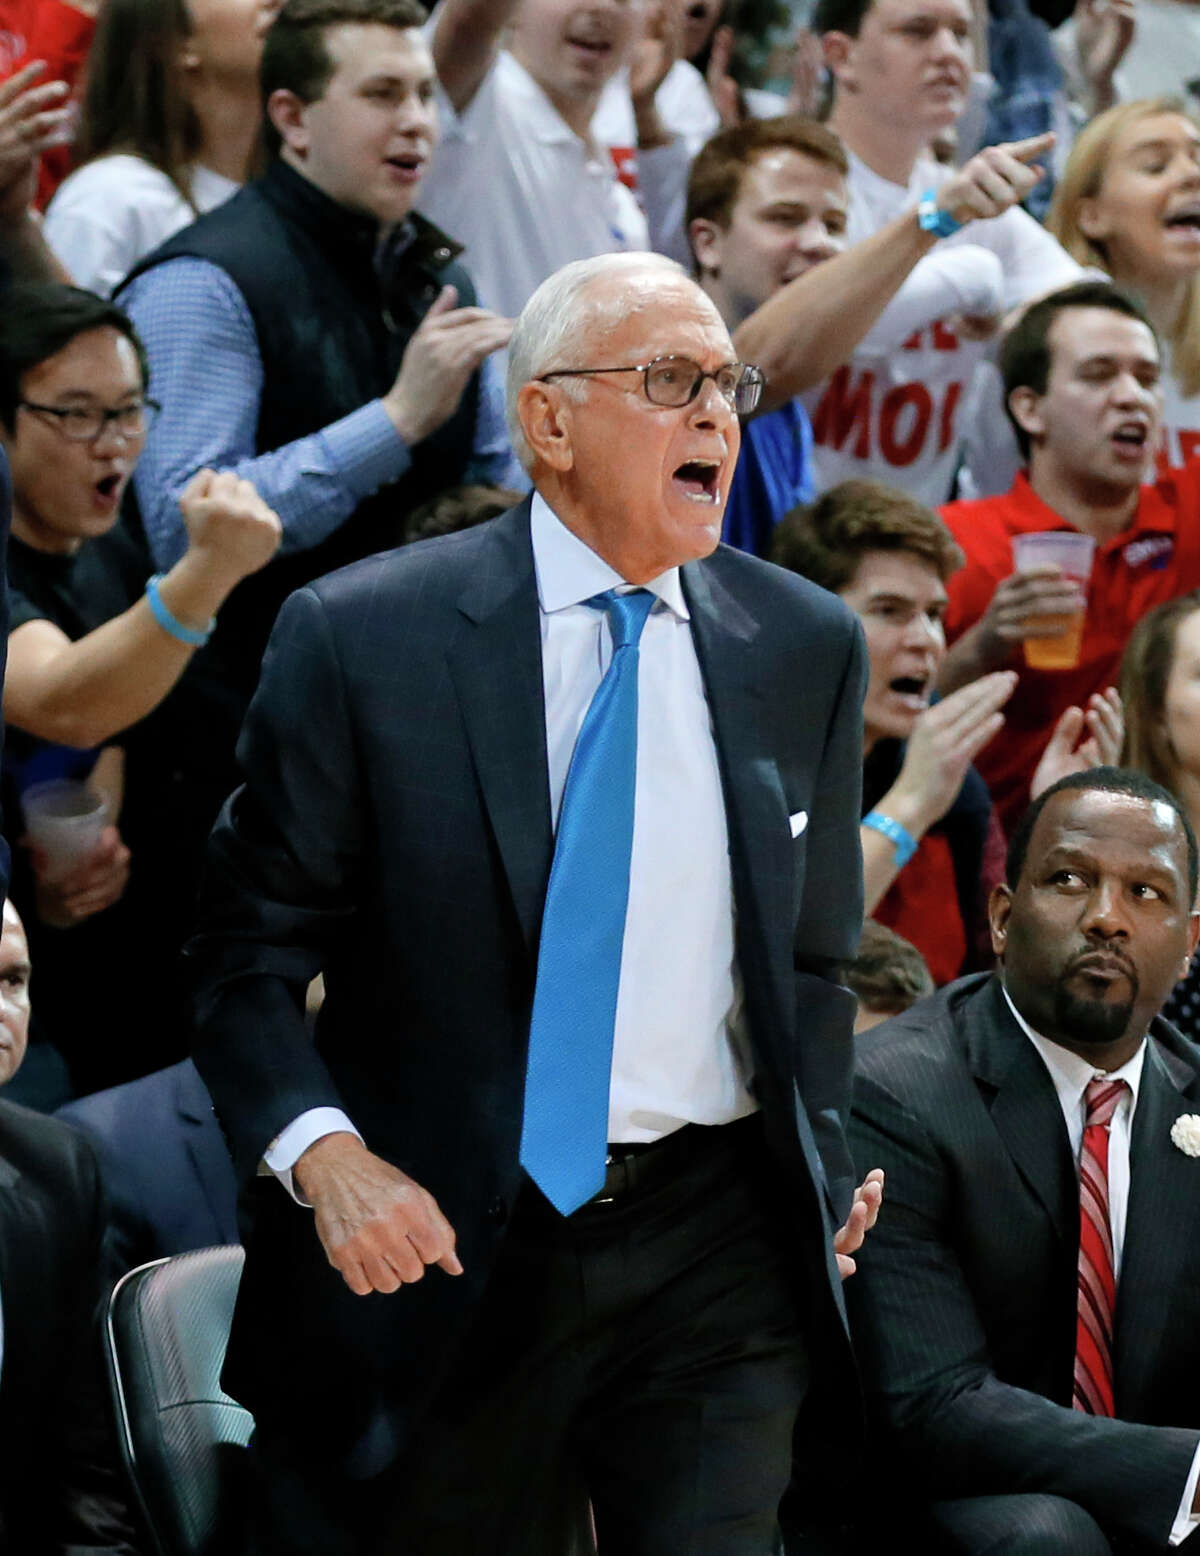 Larry Brown steps down as SMU basketball coach